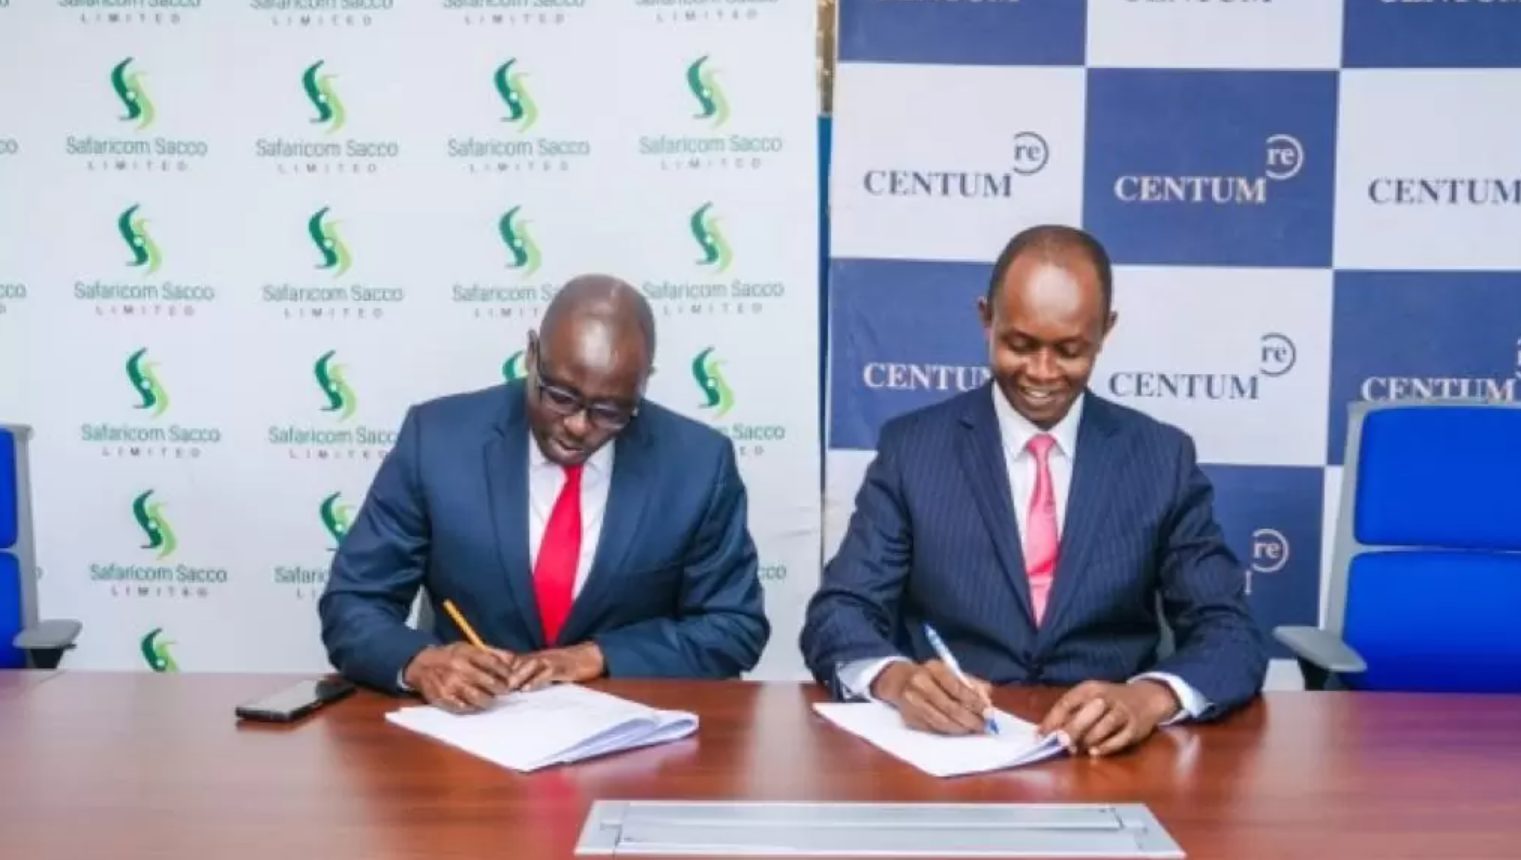 Image of Centum Real Estate MD Kenneth Mbae With Safaricom Sacco Manager